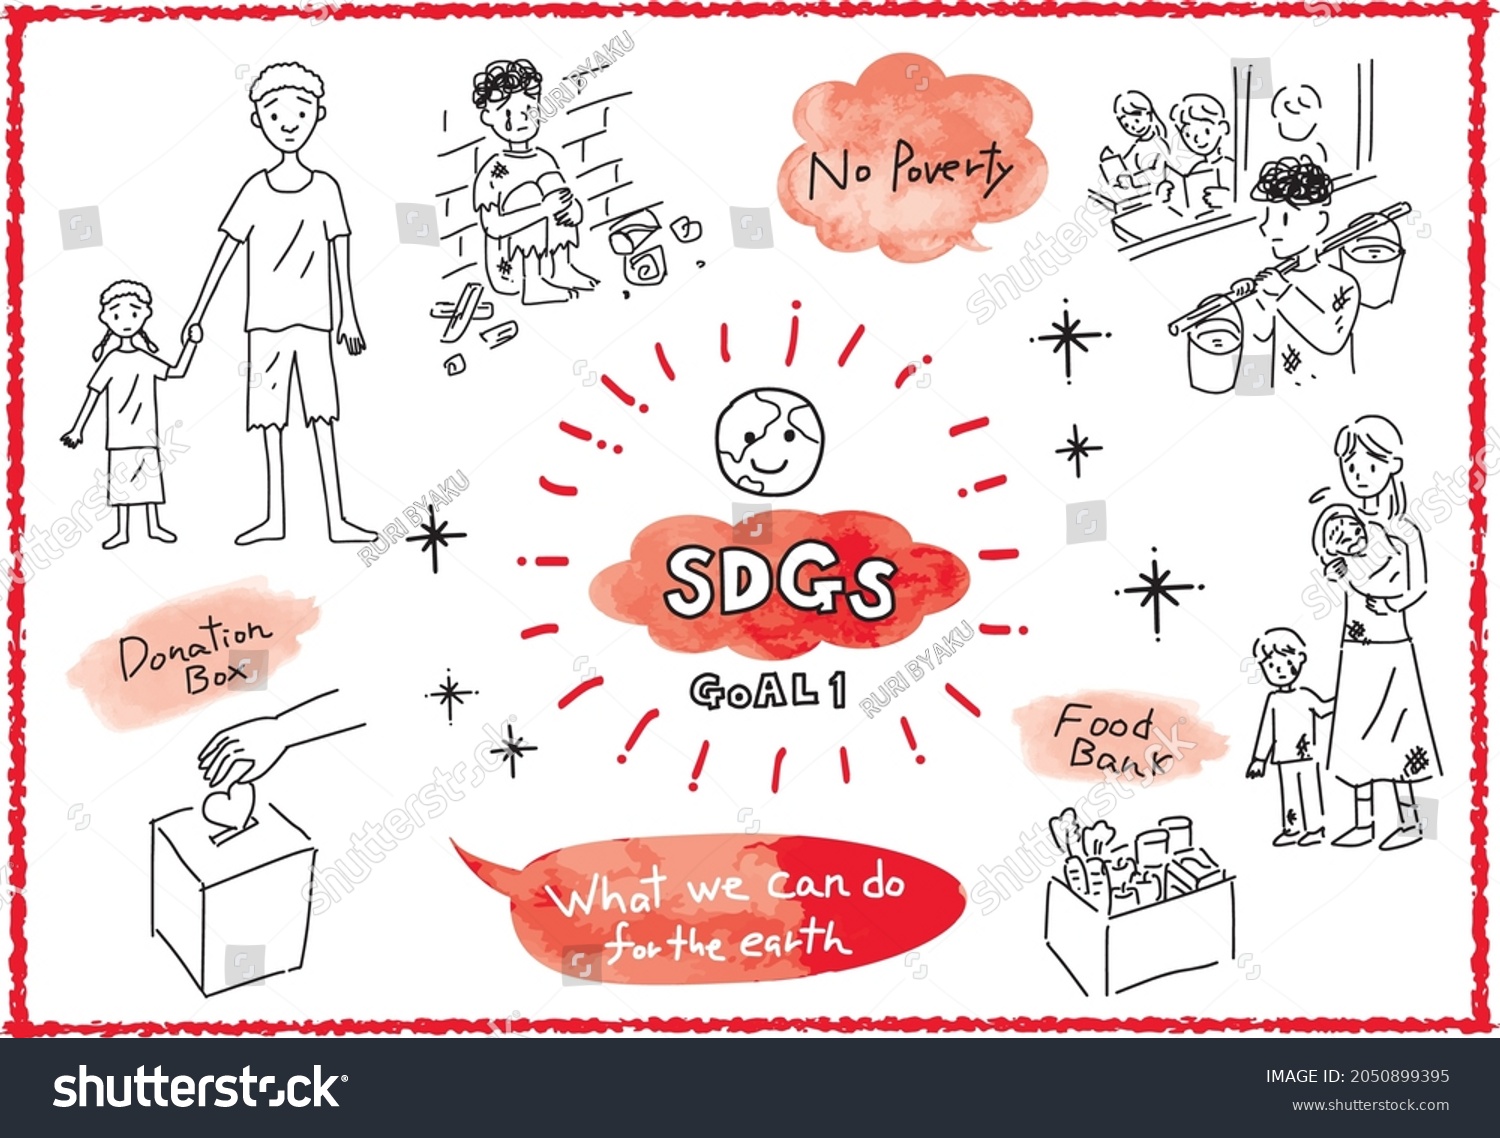 Sustainable Development Goals Goal1 No Poverty Stock Vector Royalty Free 2050899395 Shutterstock 1461